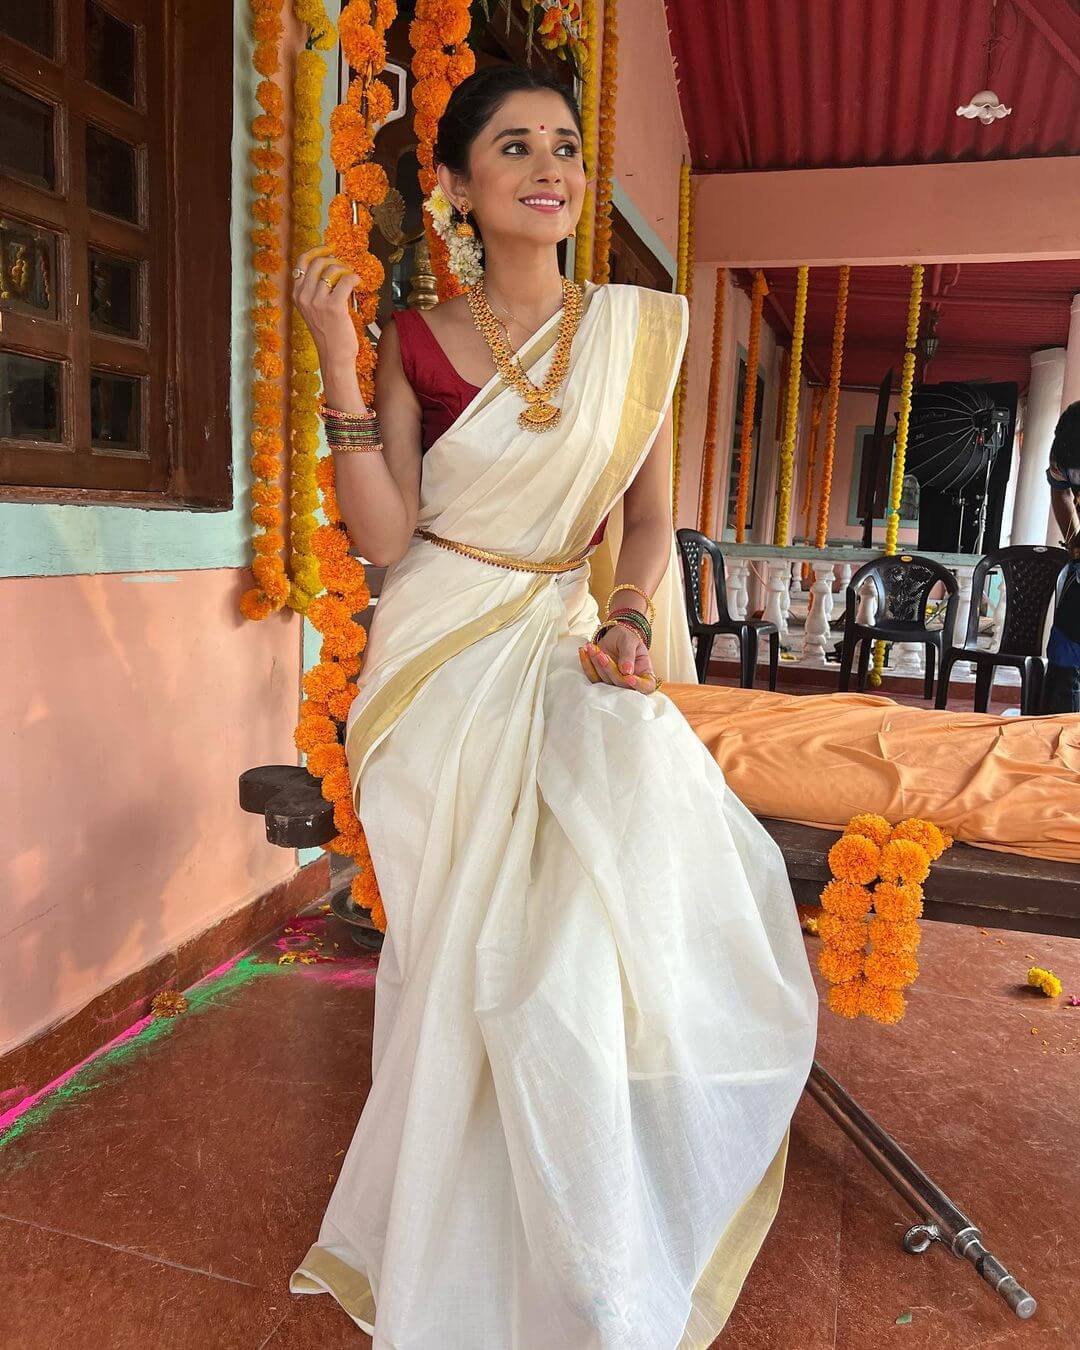 Kanika Mann In Traditional South Indian Dress With Gold Jewellery